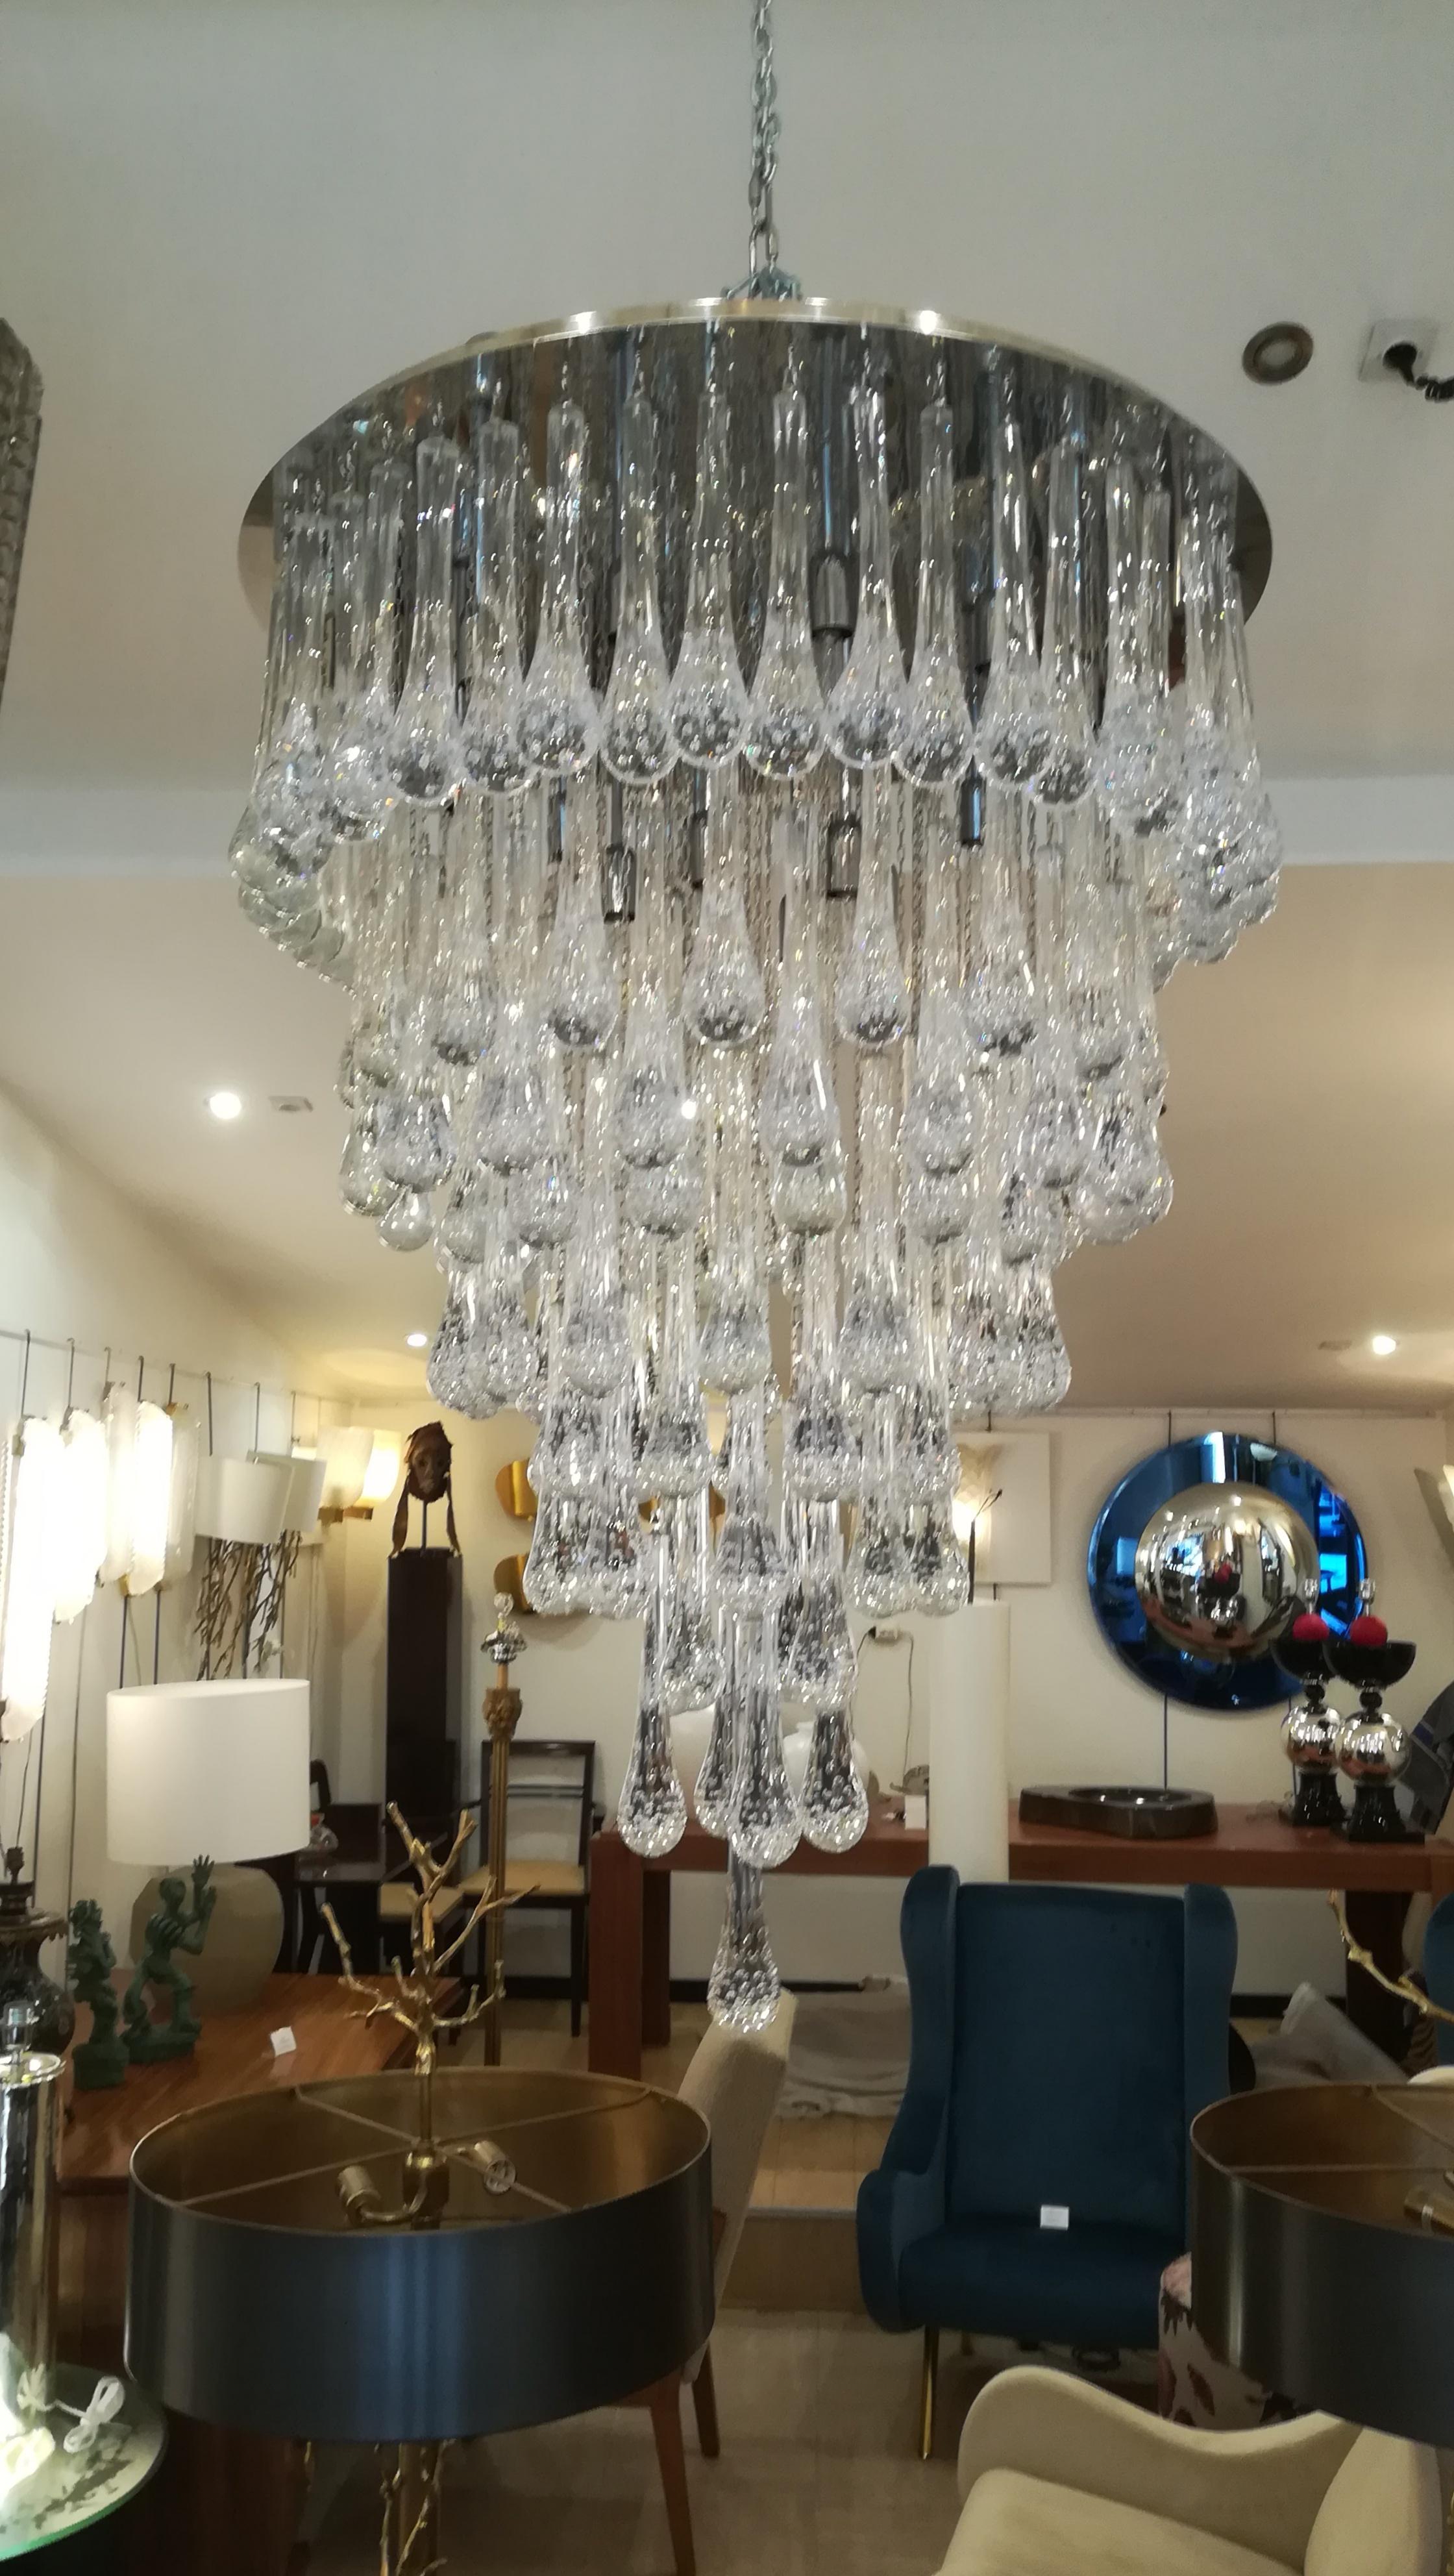 Huge Murano glass chandelier, with 141 crystal drops.